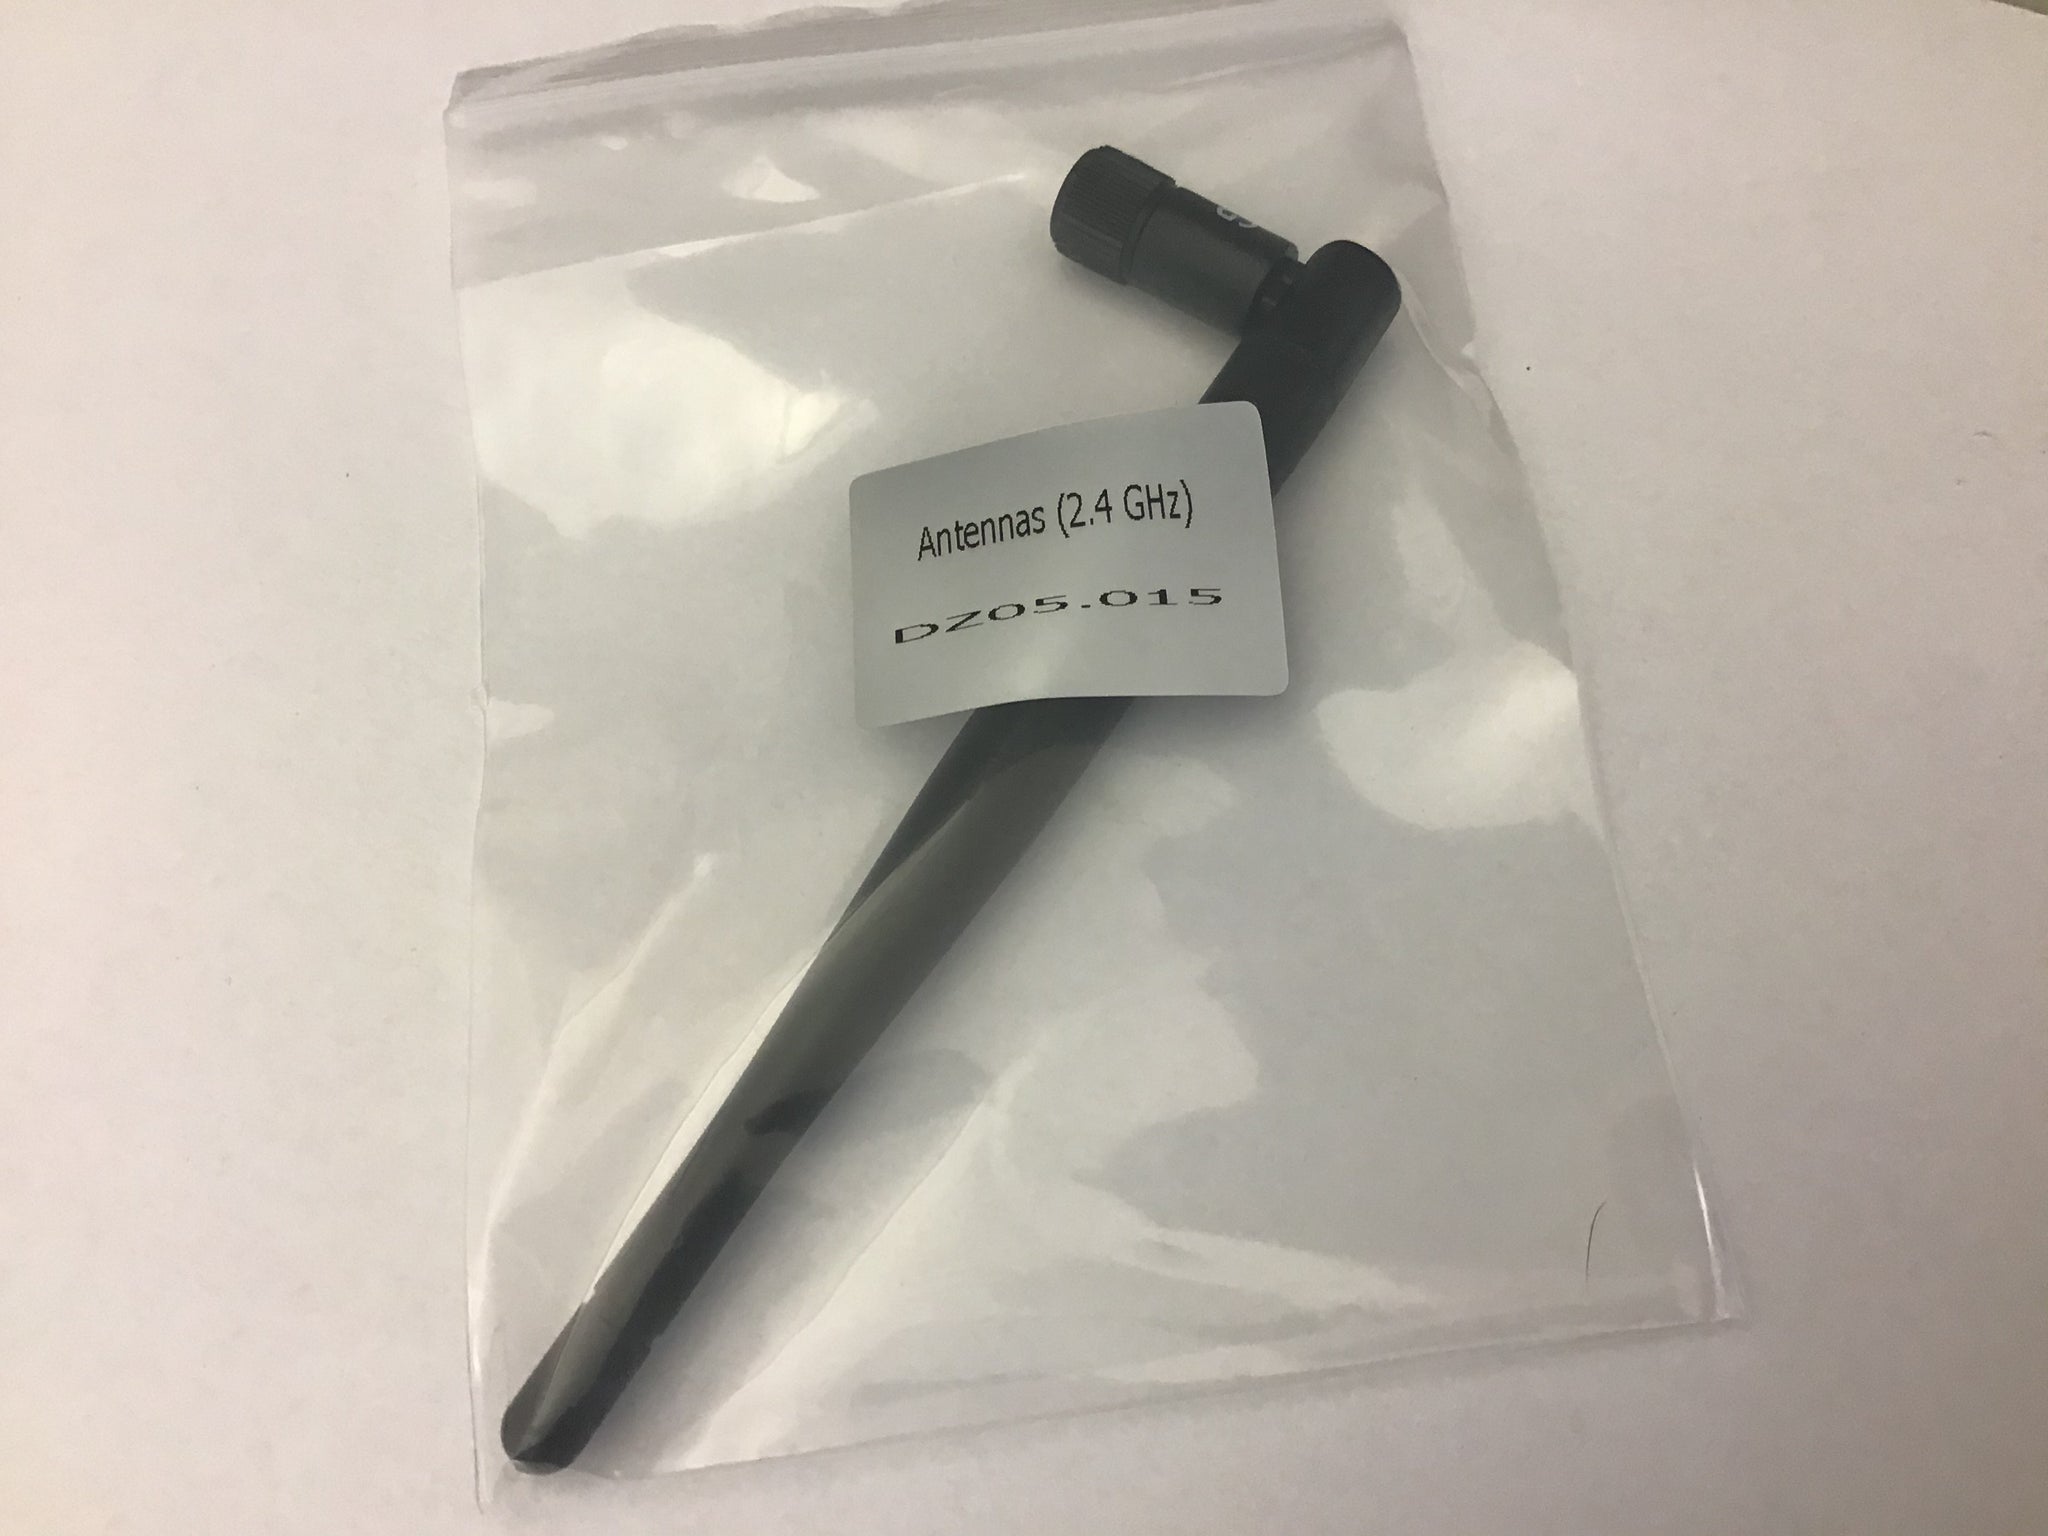 SwellPro Antenna 2.4ghz (for SD3+ and Spry+)